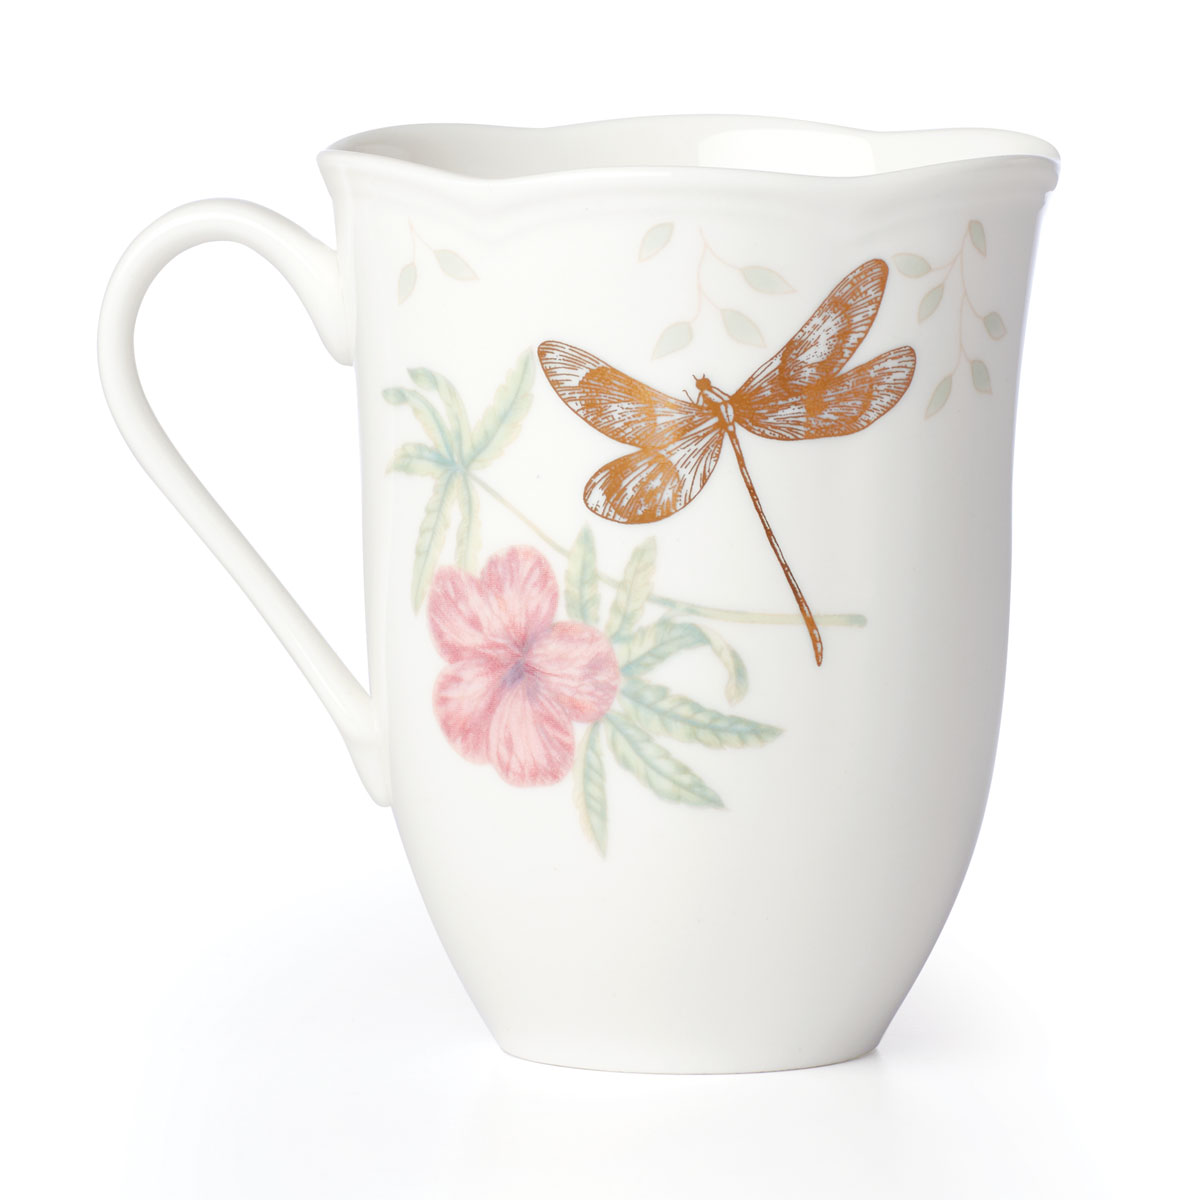 Lenox Butterly Meadow Gold China Dragonfly Mug Gold